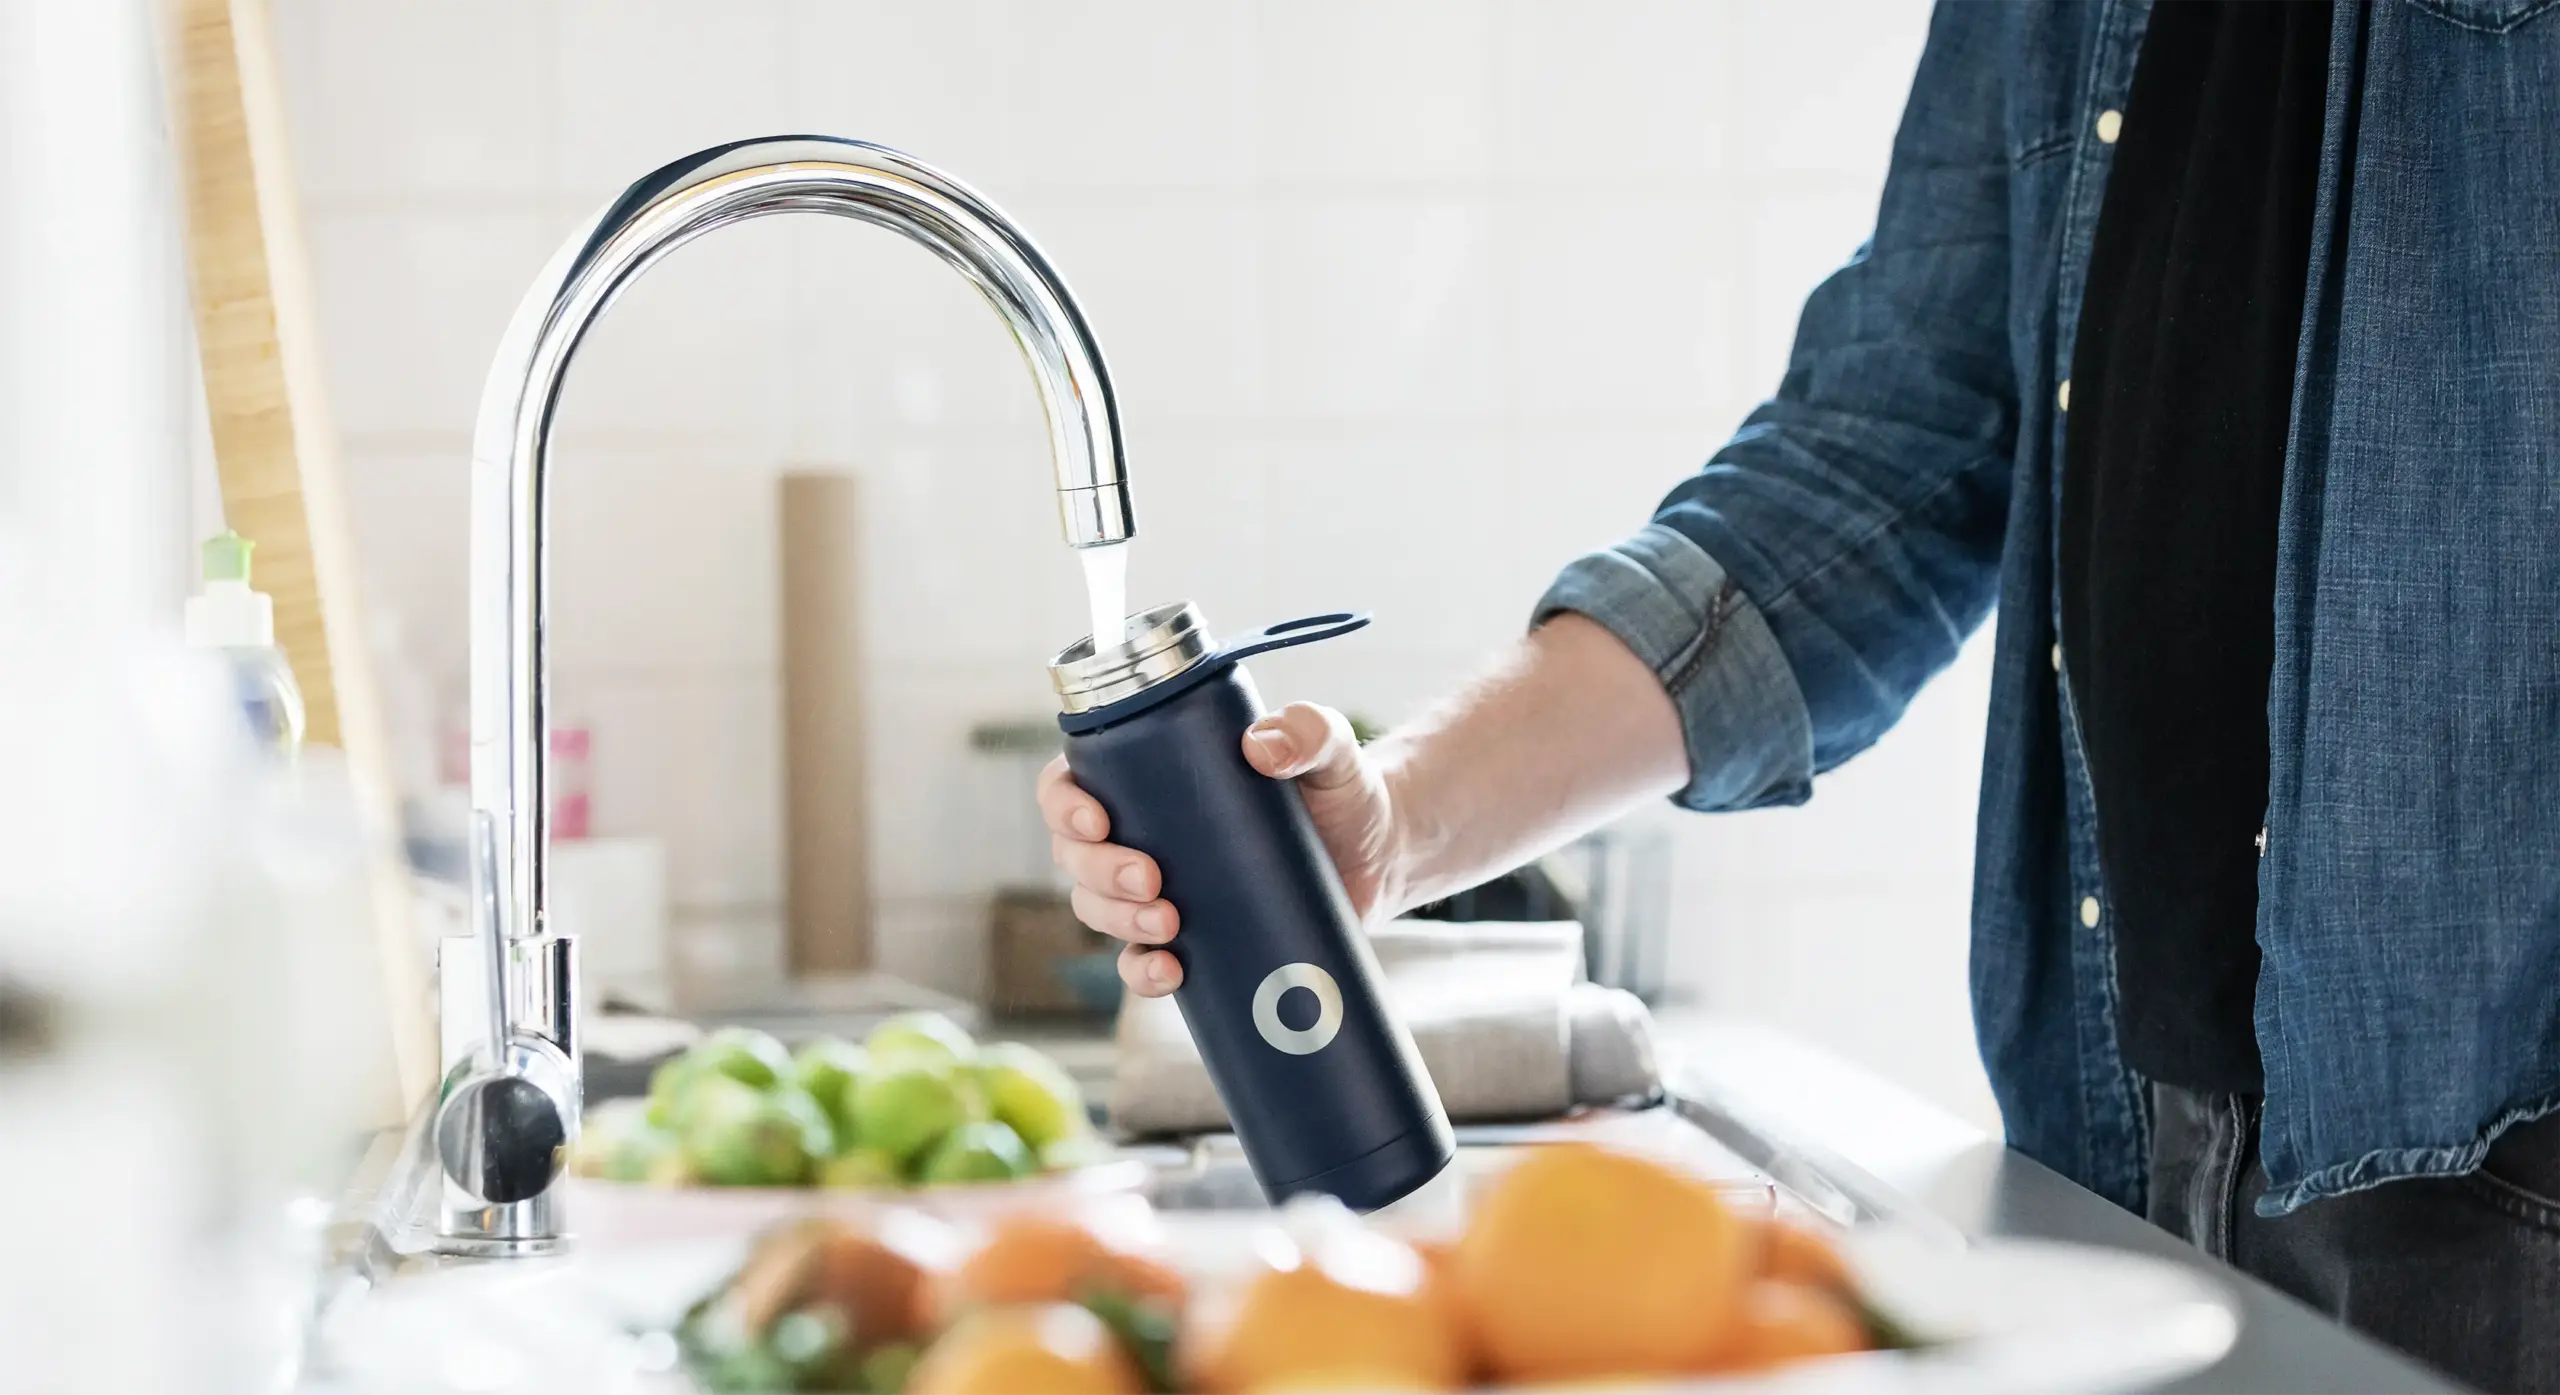 Torso and forearm filling metal water bottle with purified water from kitchen faucet.